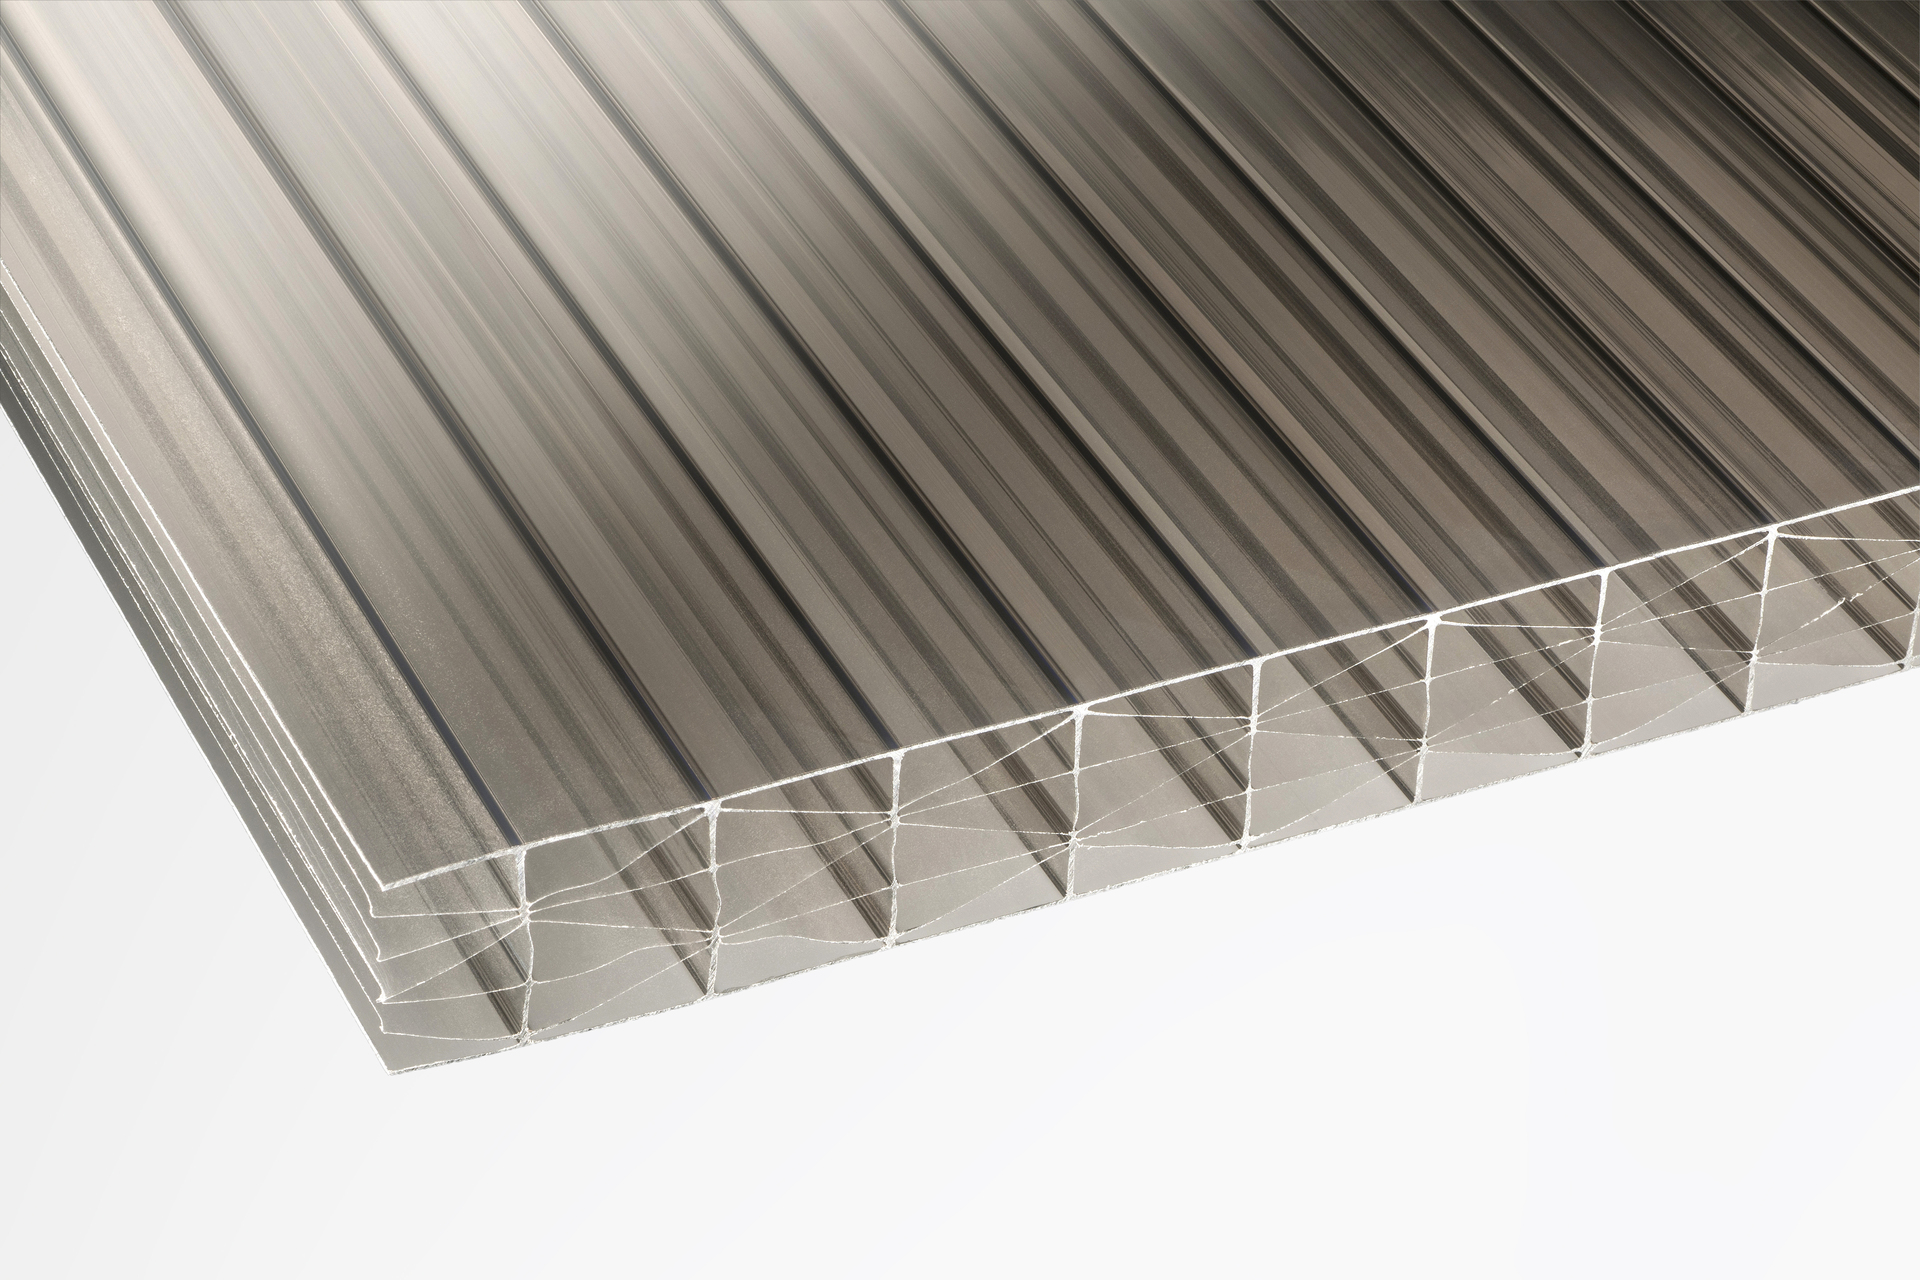 Image of 25mm Bronze Multiwall Polycarbonate Sheet - 2500 x 1050mm